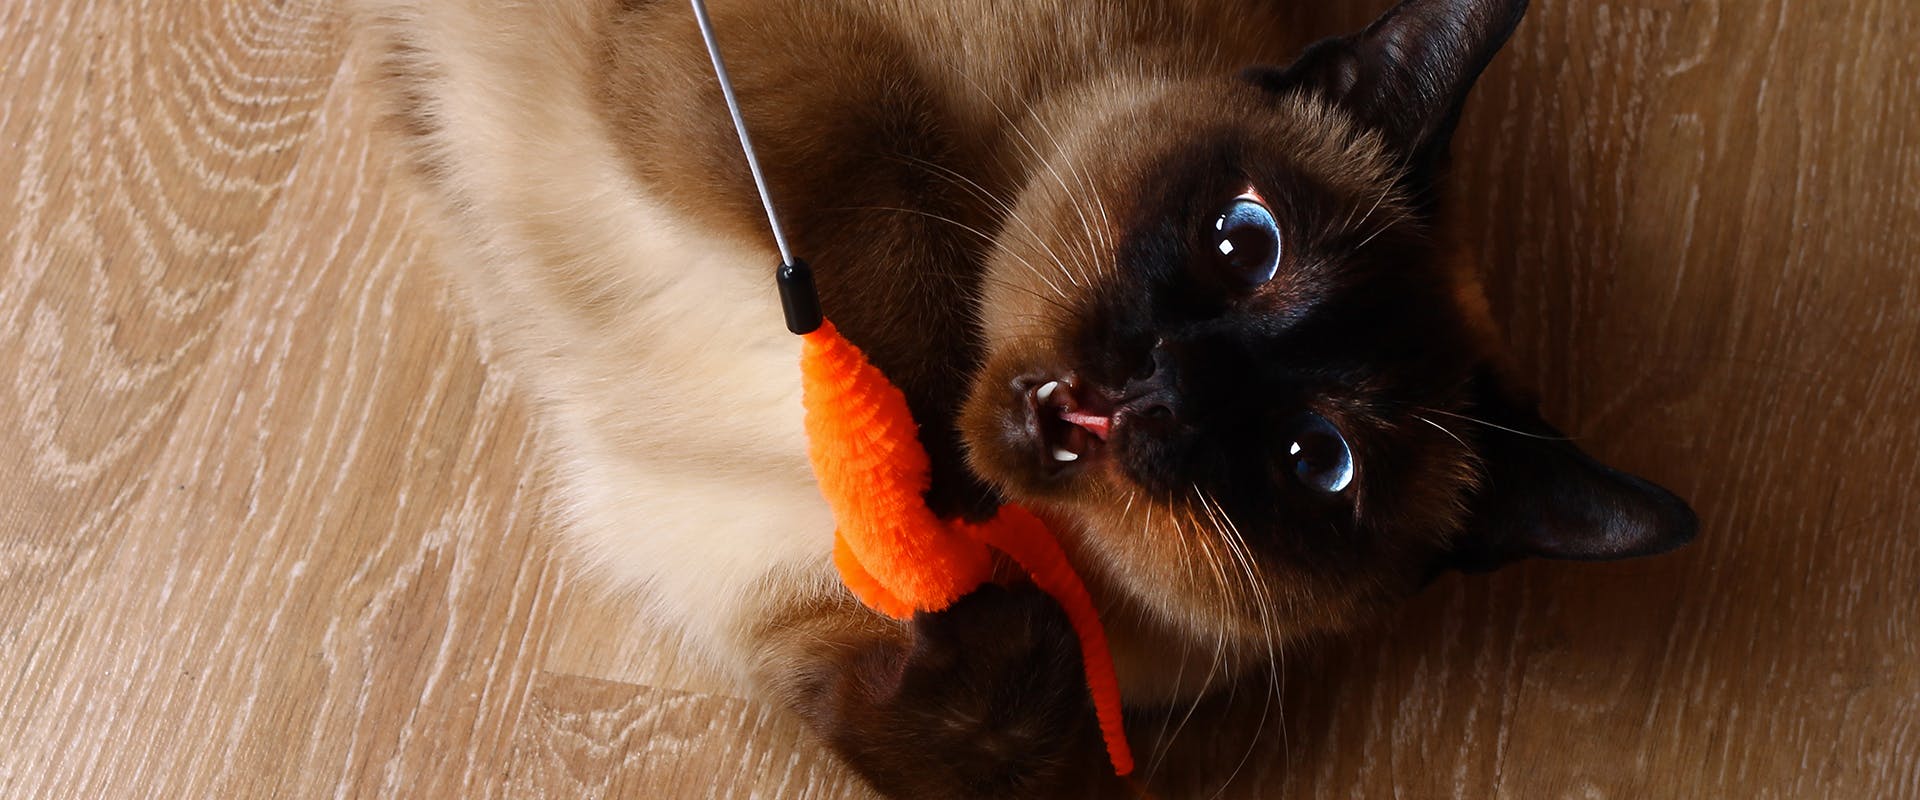 A young Siamese cat playing with a toy